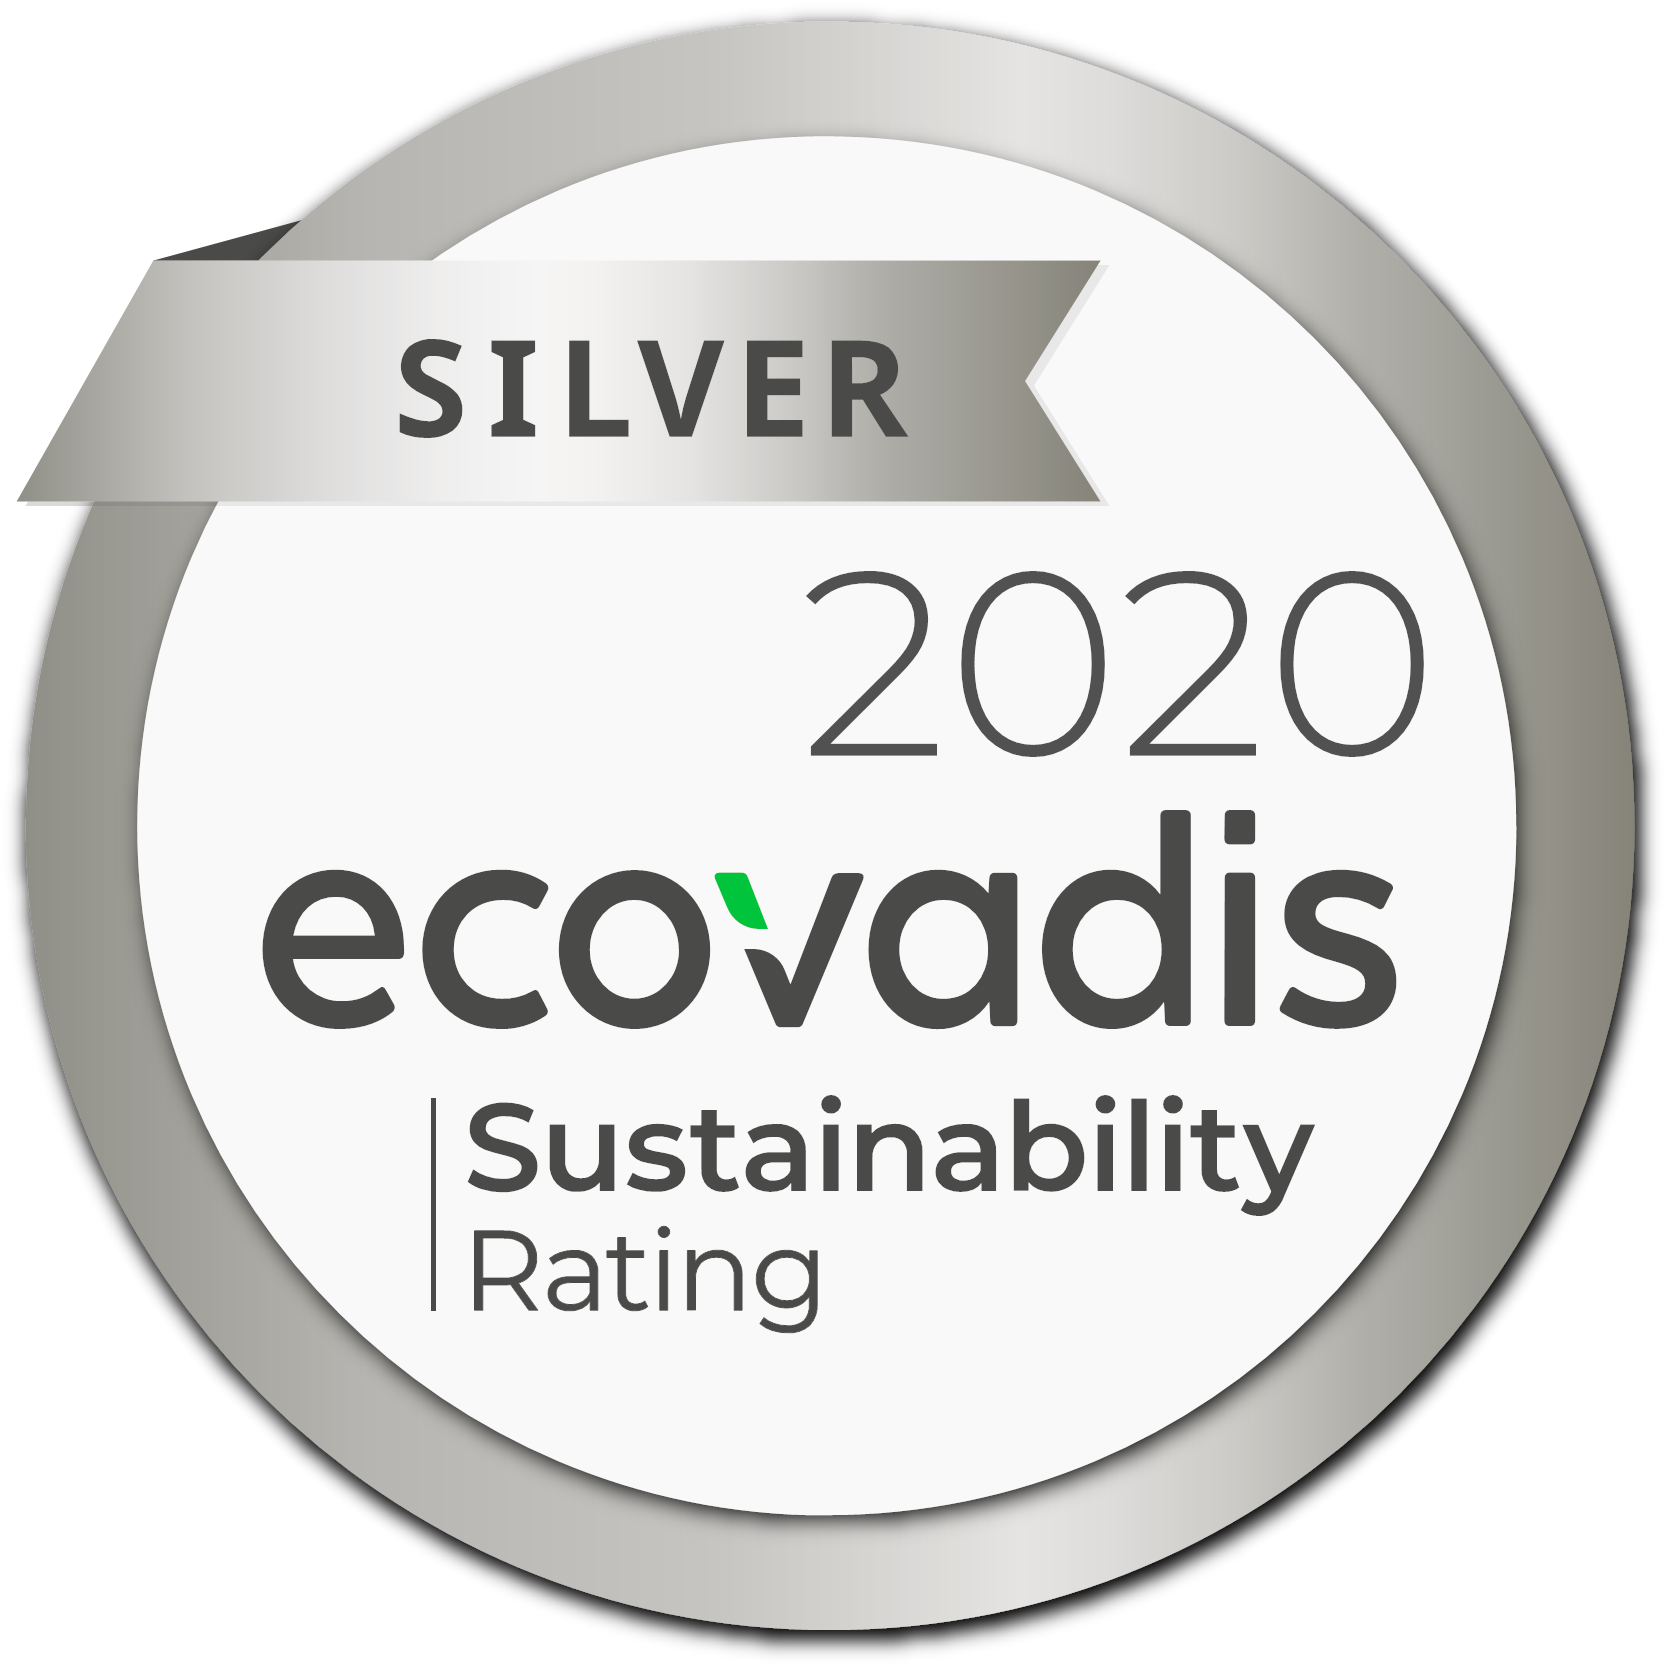 Award for sustainability: HOPPECKE receives the silver medal from EcoVadis - Monday, 07.09.2020